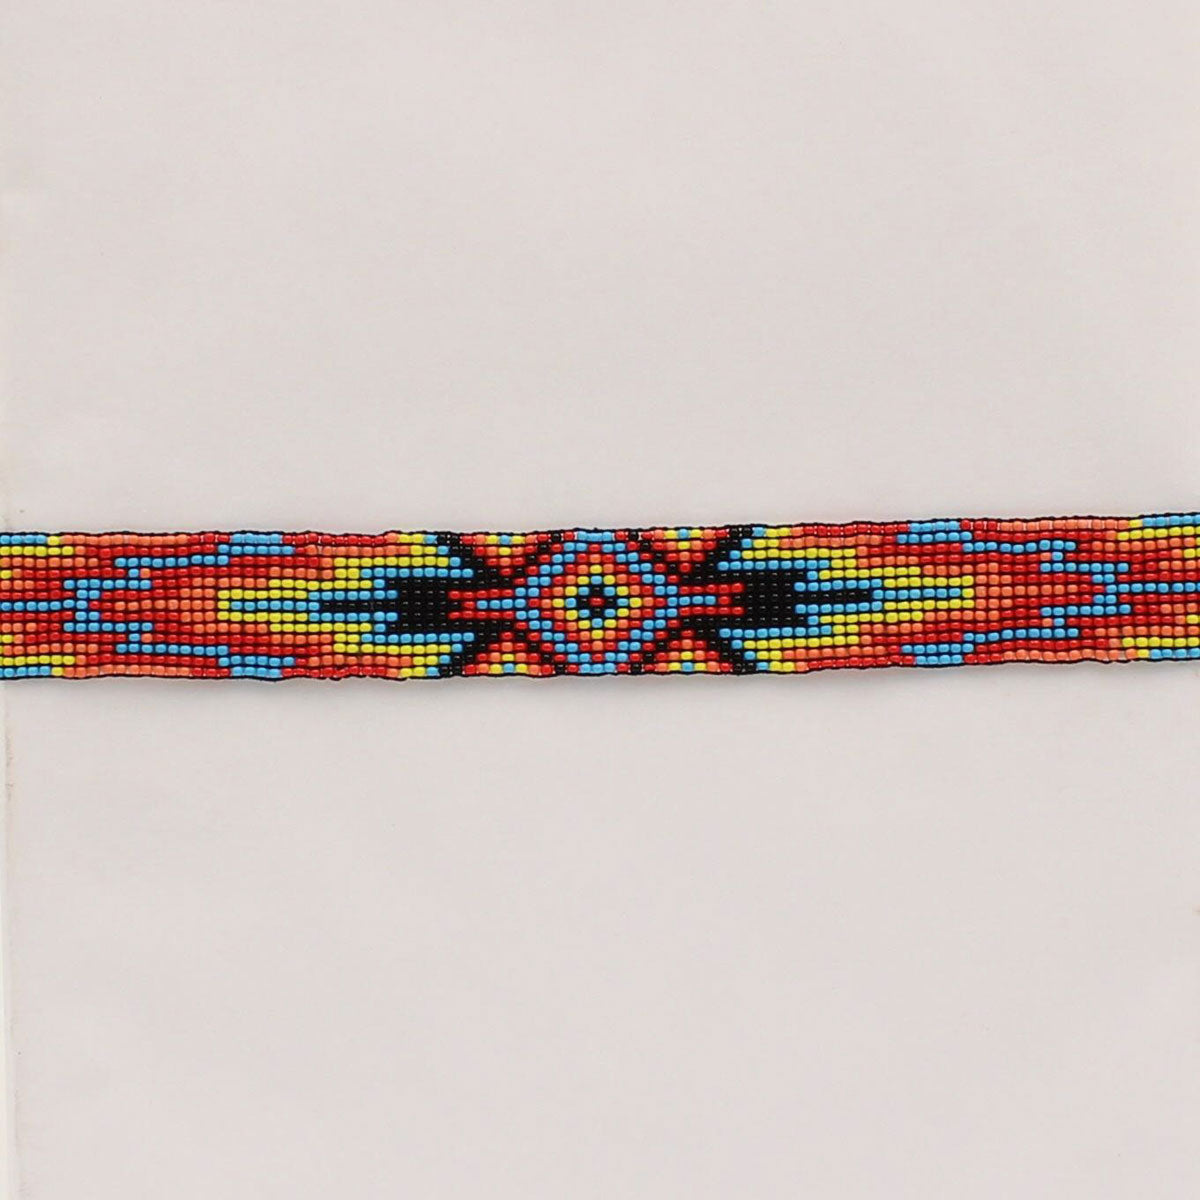 TWISTER HATBAND BEADED STRETCH MULTICOLORED #0273597